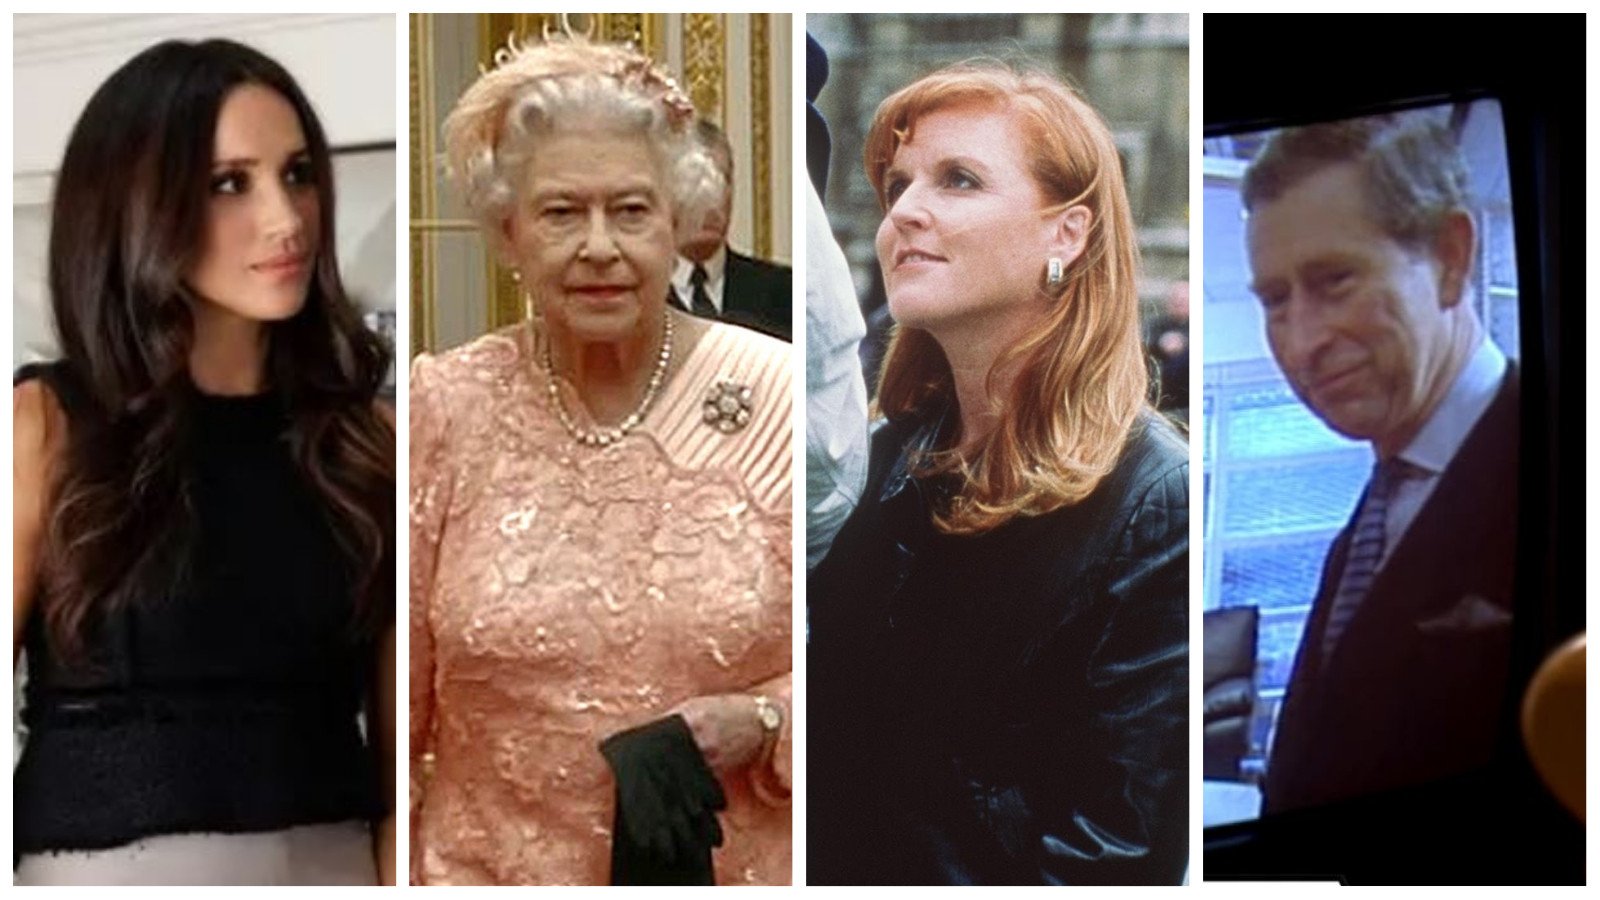 From full length interviews to short cameos, find out which members of the Royal Family made appearances in films and on TV! Photos: NBC Universal, AFP, Getty Images, Coronation Street/Facebook